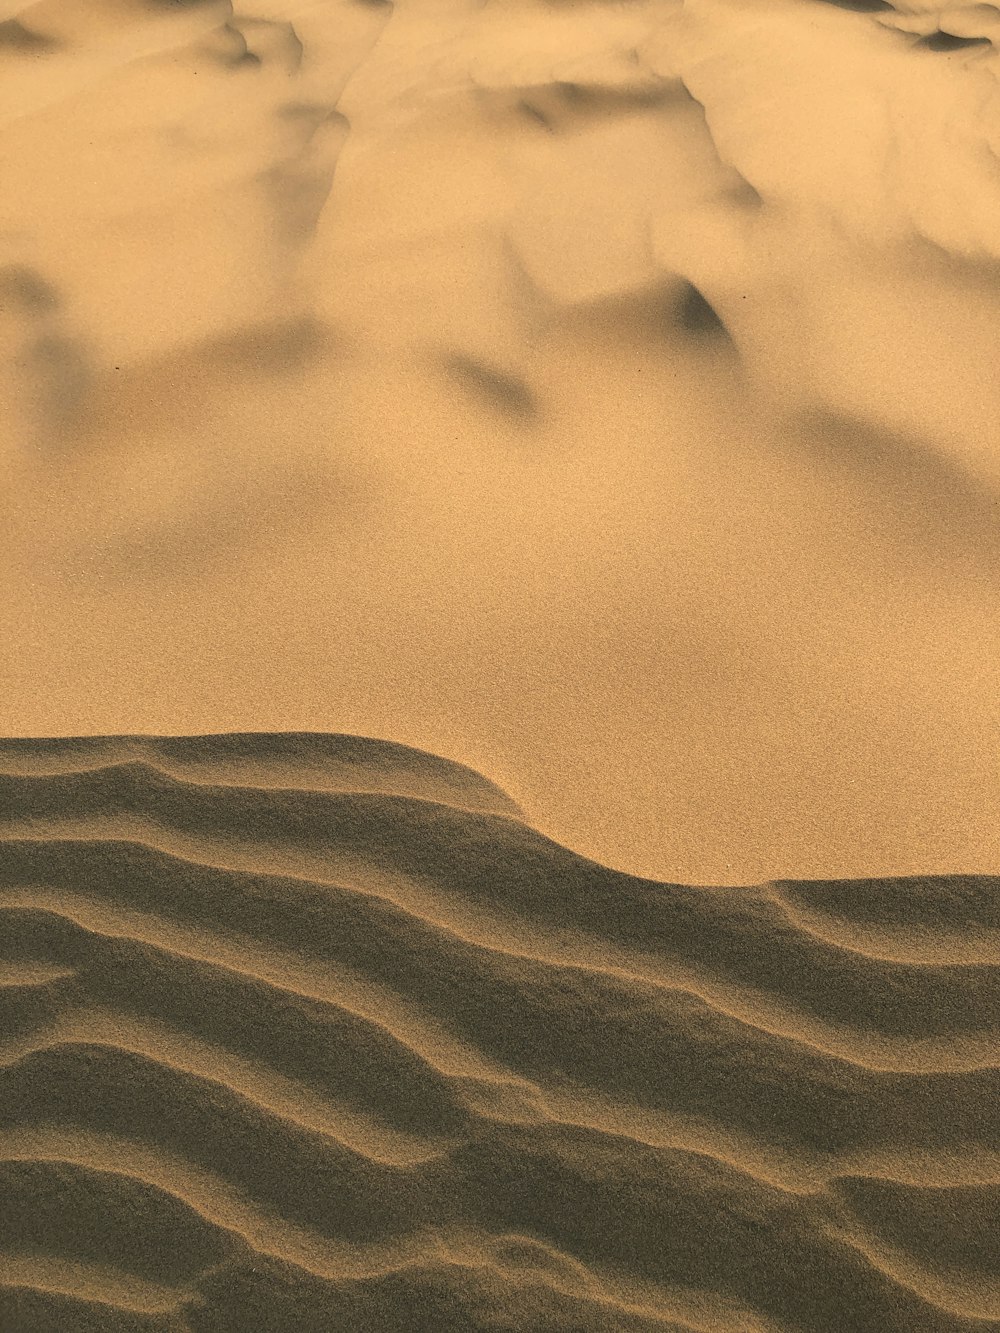 a desert landscape with sand dunes and mountains in the distance